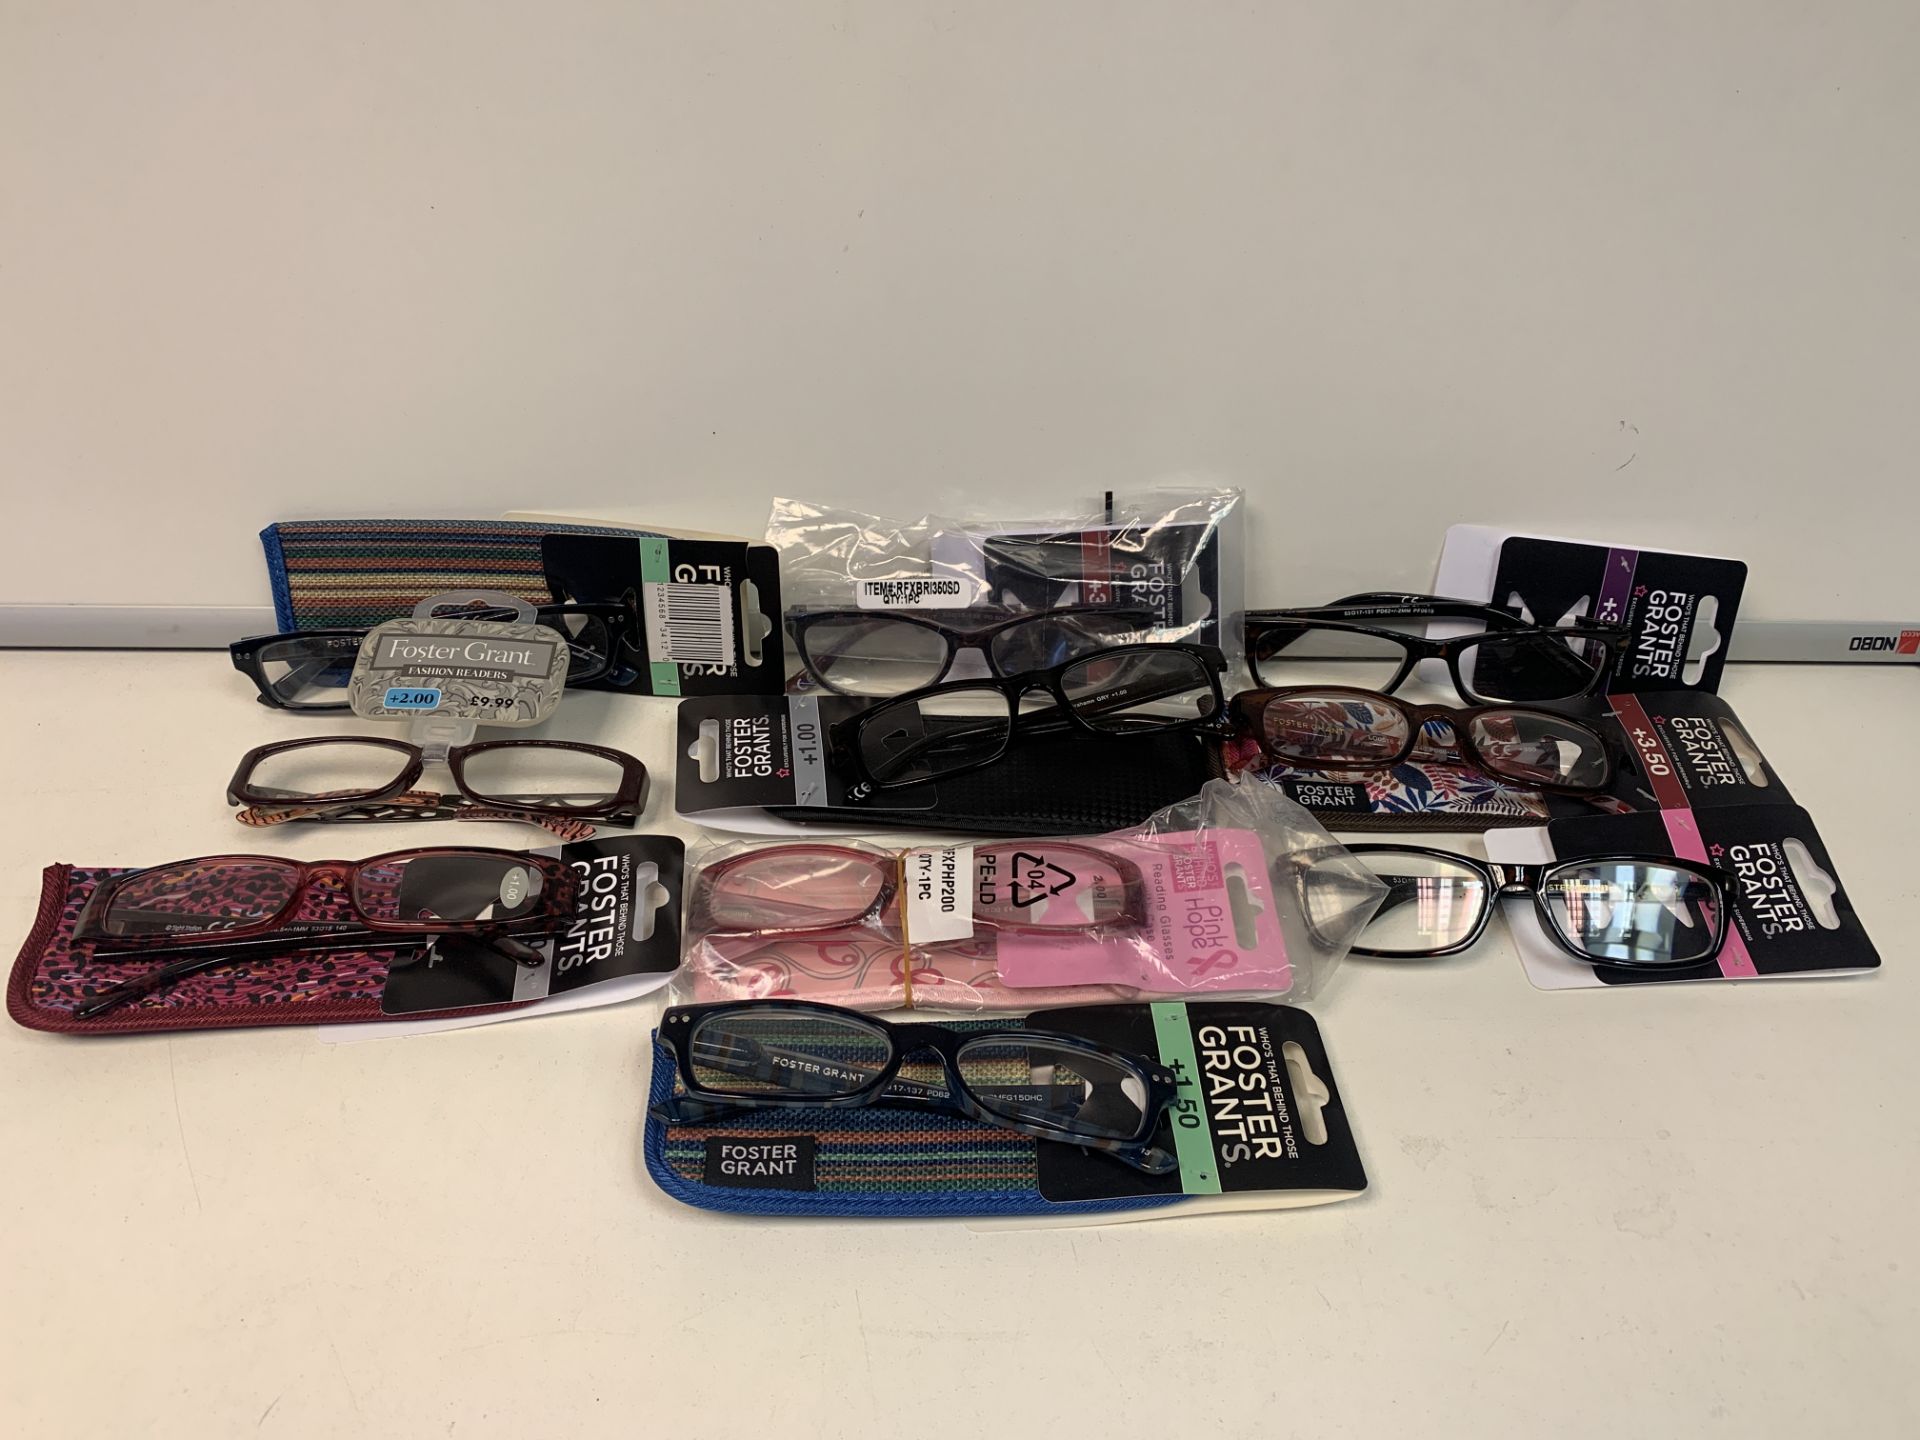 30 x NEW PACKAGED PAIRS OF ASSORTED FOSTER GRANTS READING GLASSES. ASSORTED STYLES/STRENGTHS.